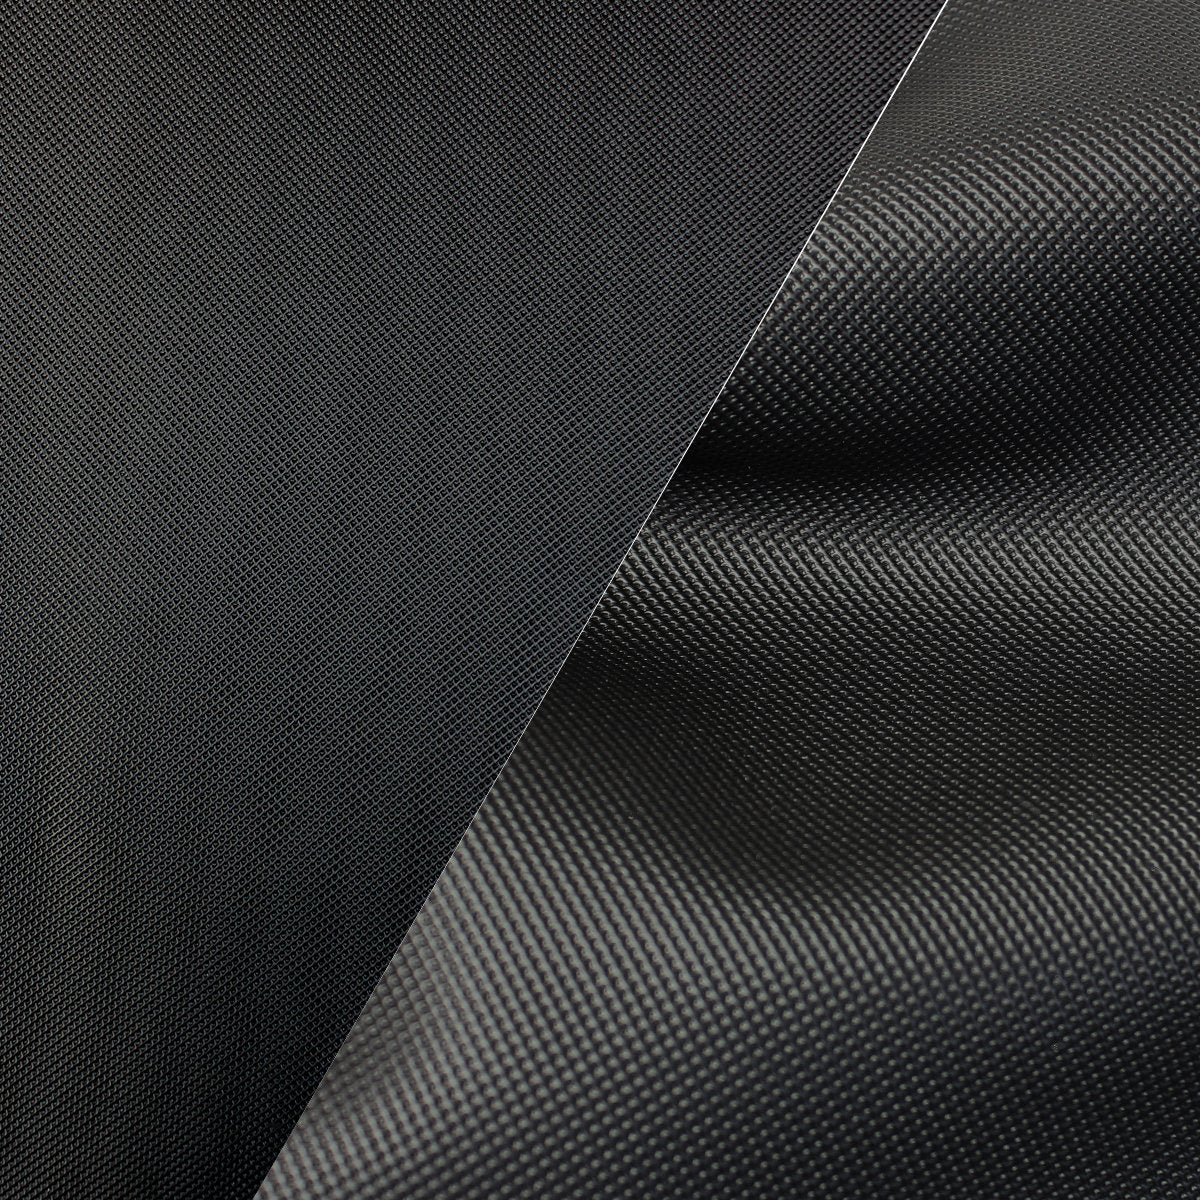 WARWICK BLACK Faux Leather Upholstery Vinyl Fabric